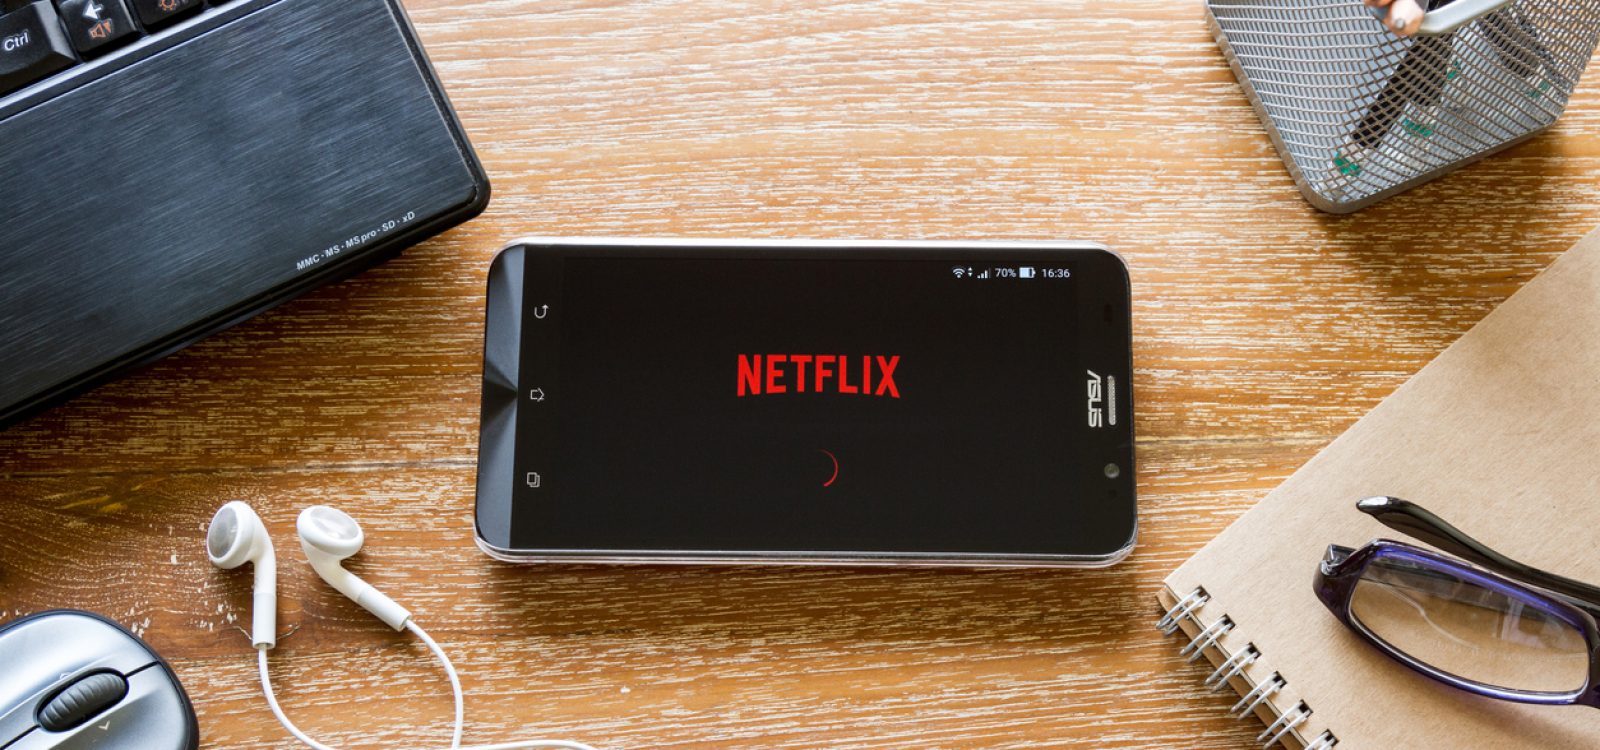 The role of data tracking in Netflix’s creative success